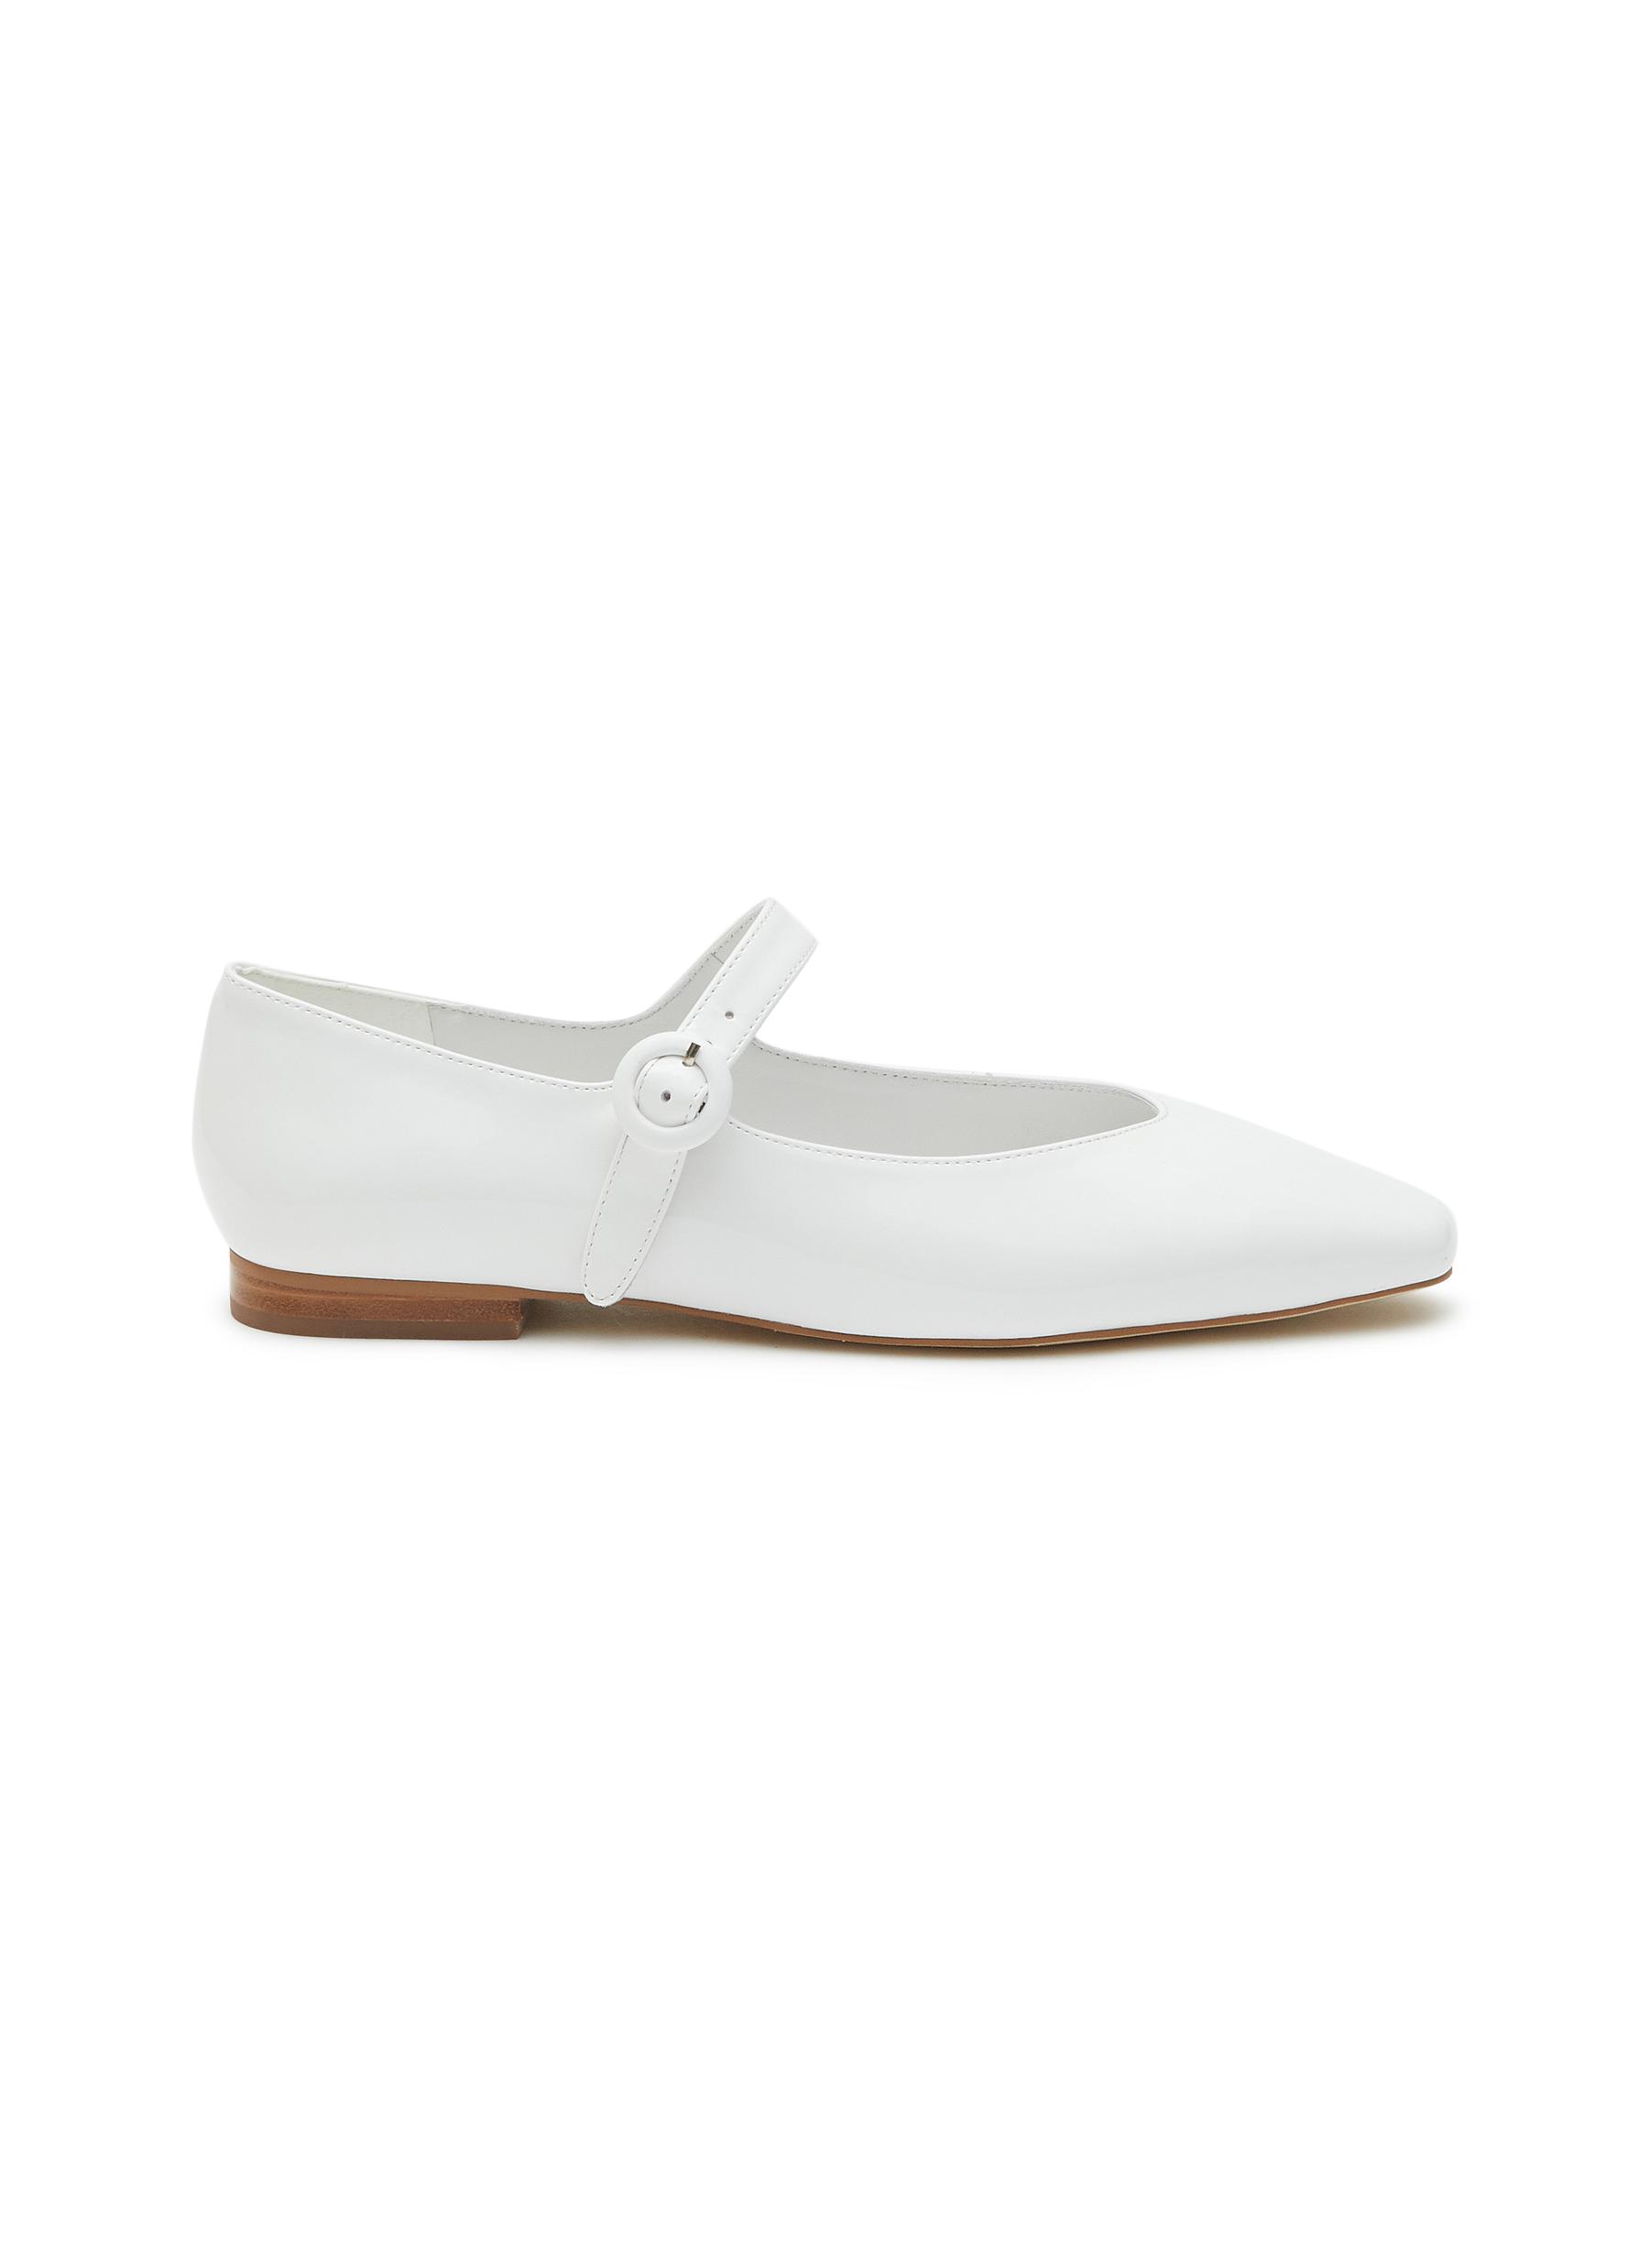 Pedder Red 'lou' Patent Leather Mary Jane Flats In White